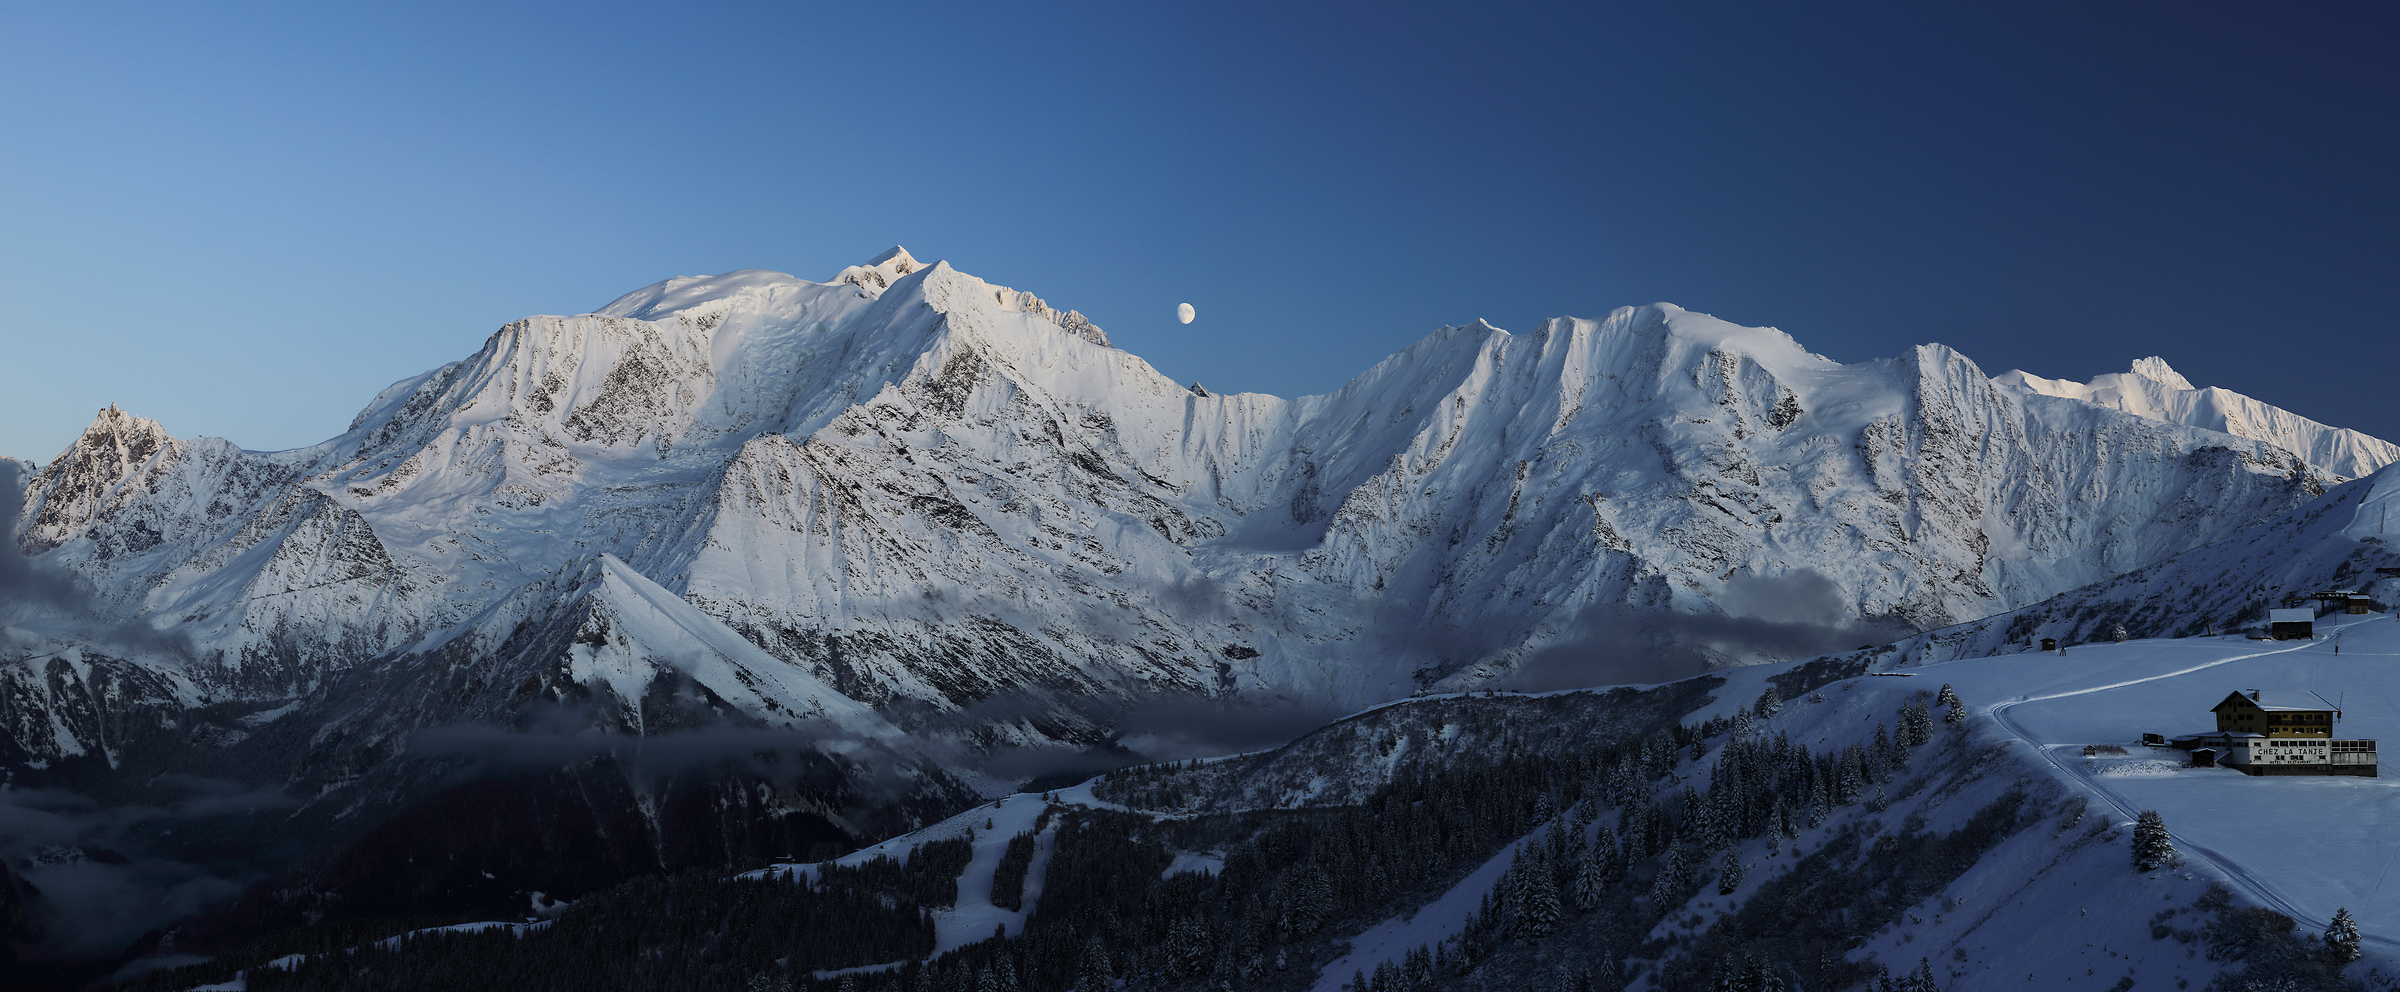 148 megapixels! A very high resolution, large-format VAST photo print of a mountain range at night with the moon; landscape photograph created by Alexandre Deschaumes in Mont Blanc Massif, Saint-Gervais-les-Bains, France